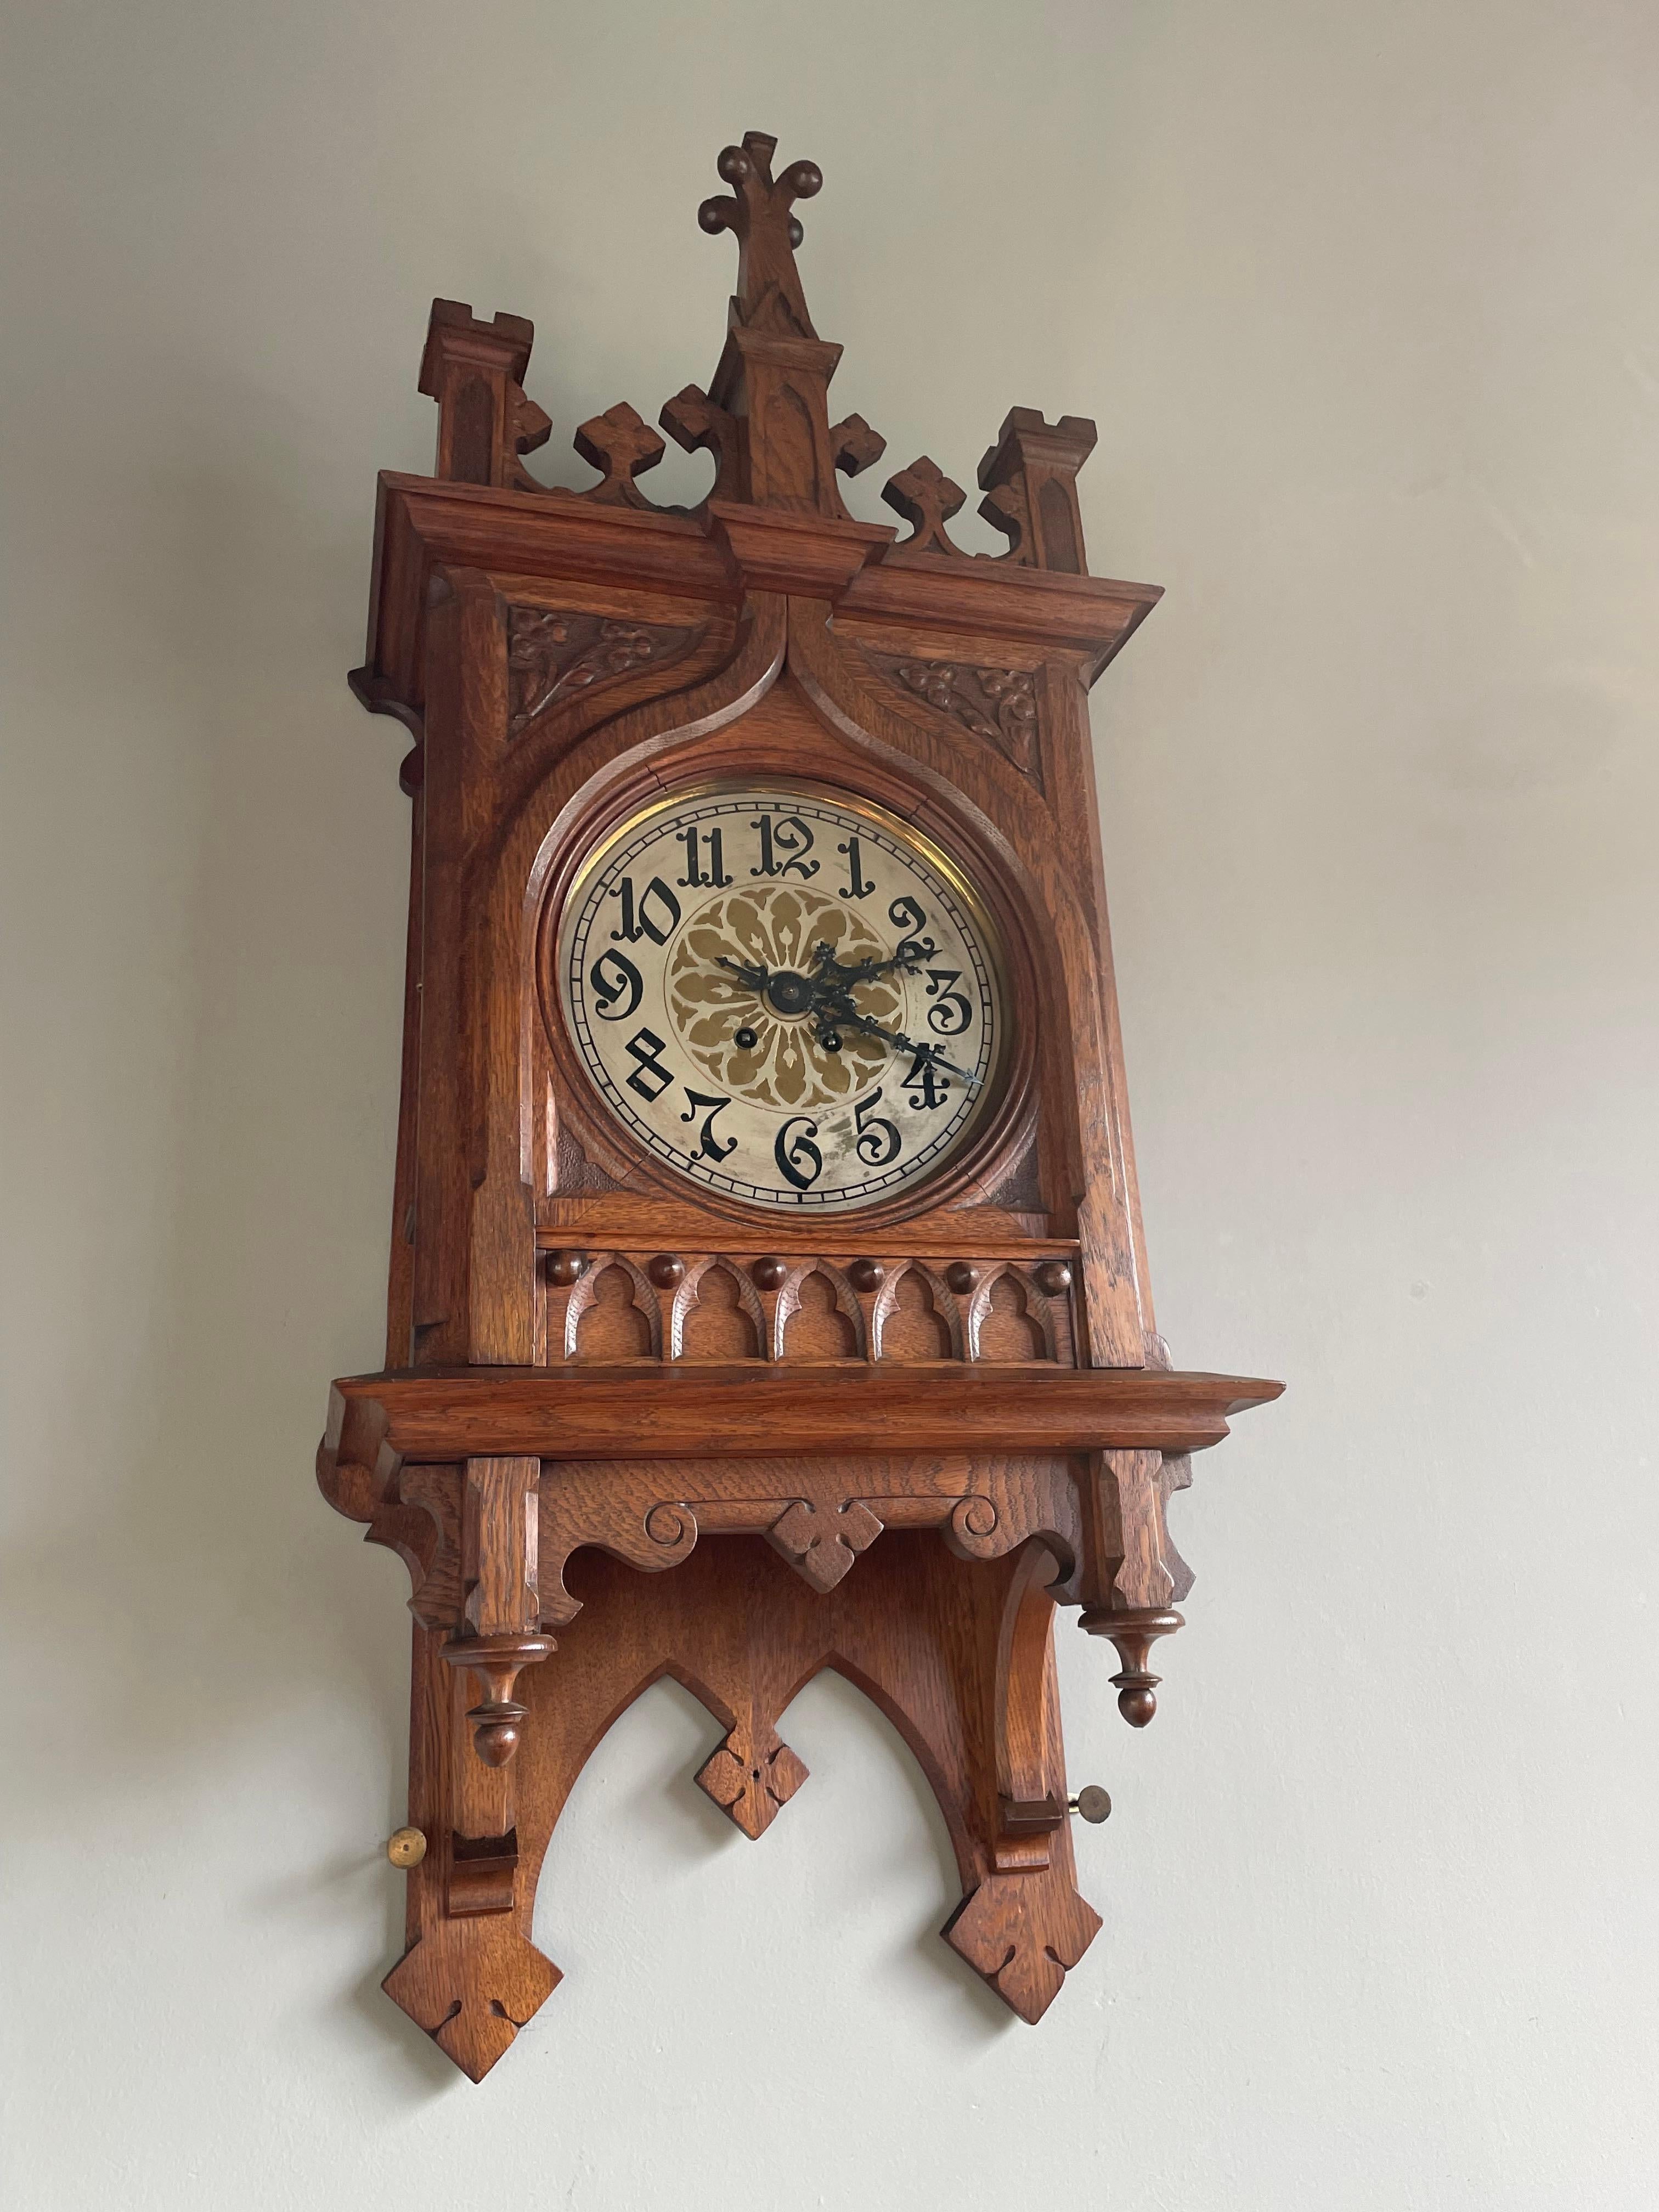 European Rare & Large Antique Hand Carved Gothic Revival Wall Clock w. Lenzkirch Movement